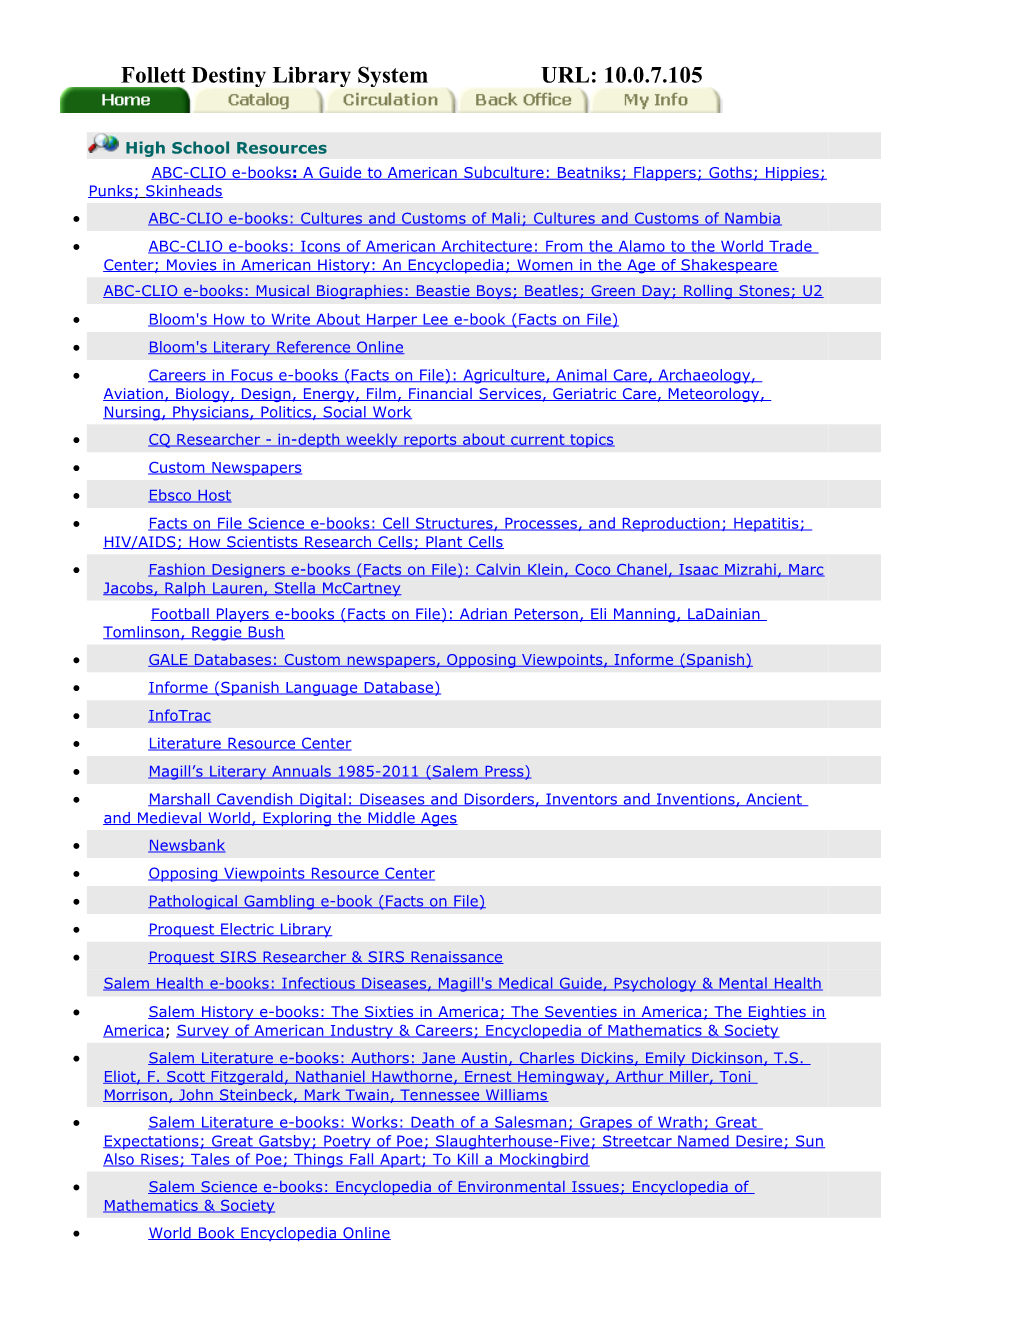 Online Resources Available for Home Access2012